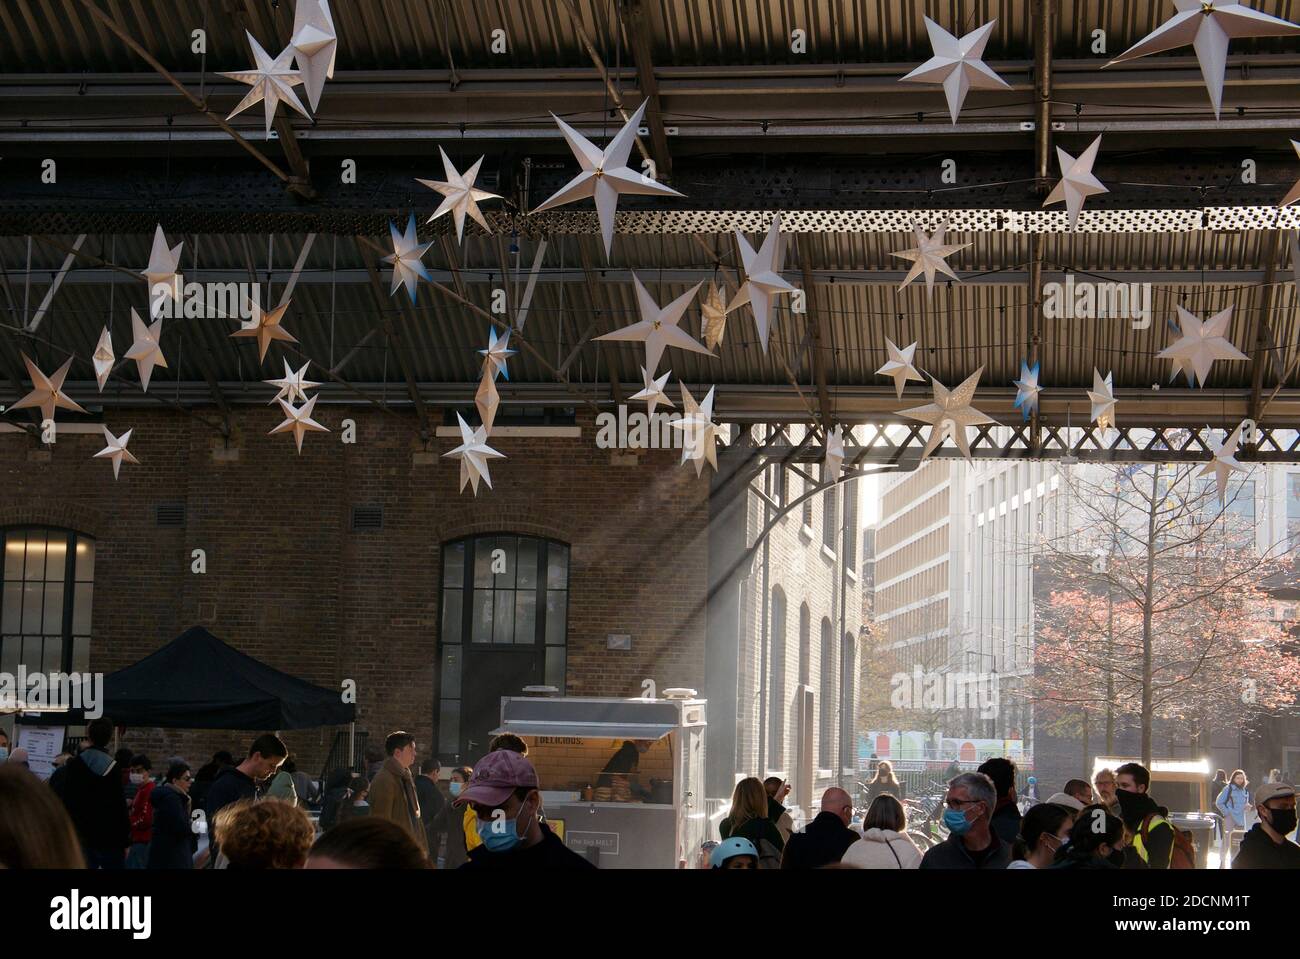 Canopy Market with star shaped Christmas decorations dangling from the ceiling. Coal Drops Yard, Kings Cross, London. Stock Photo